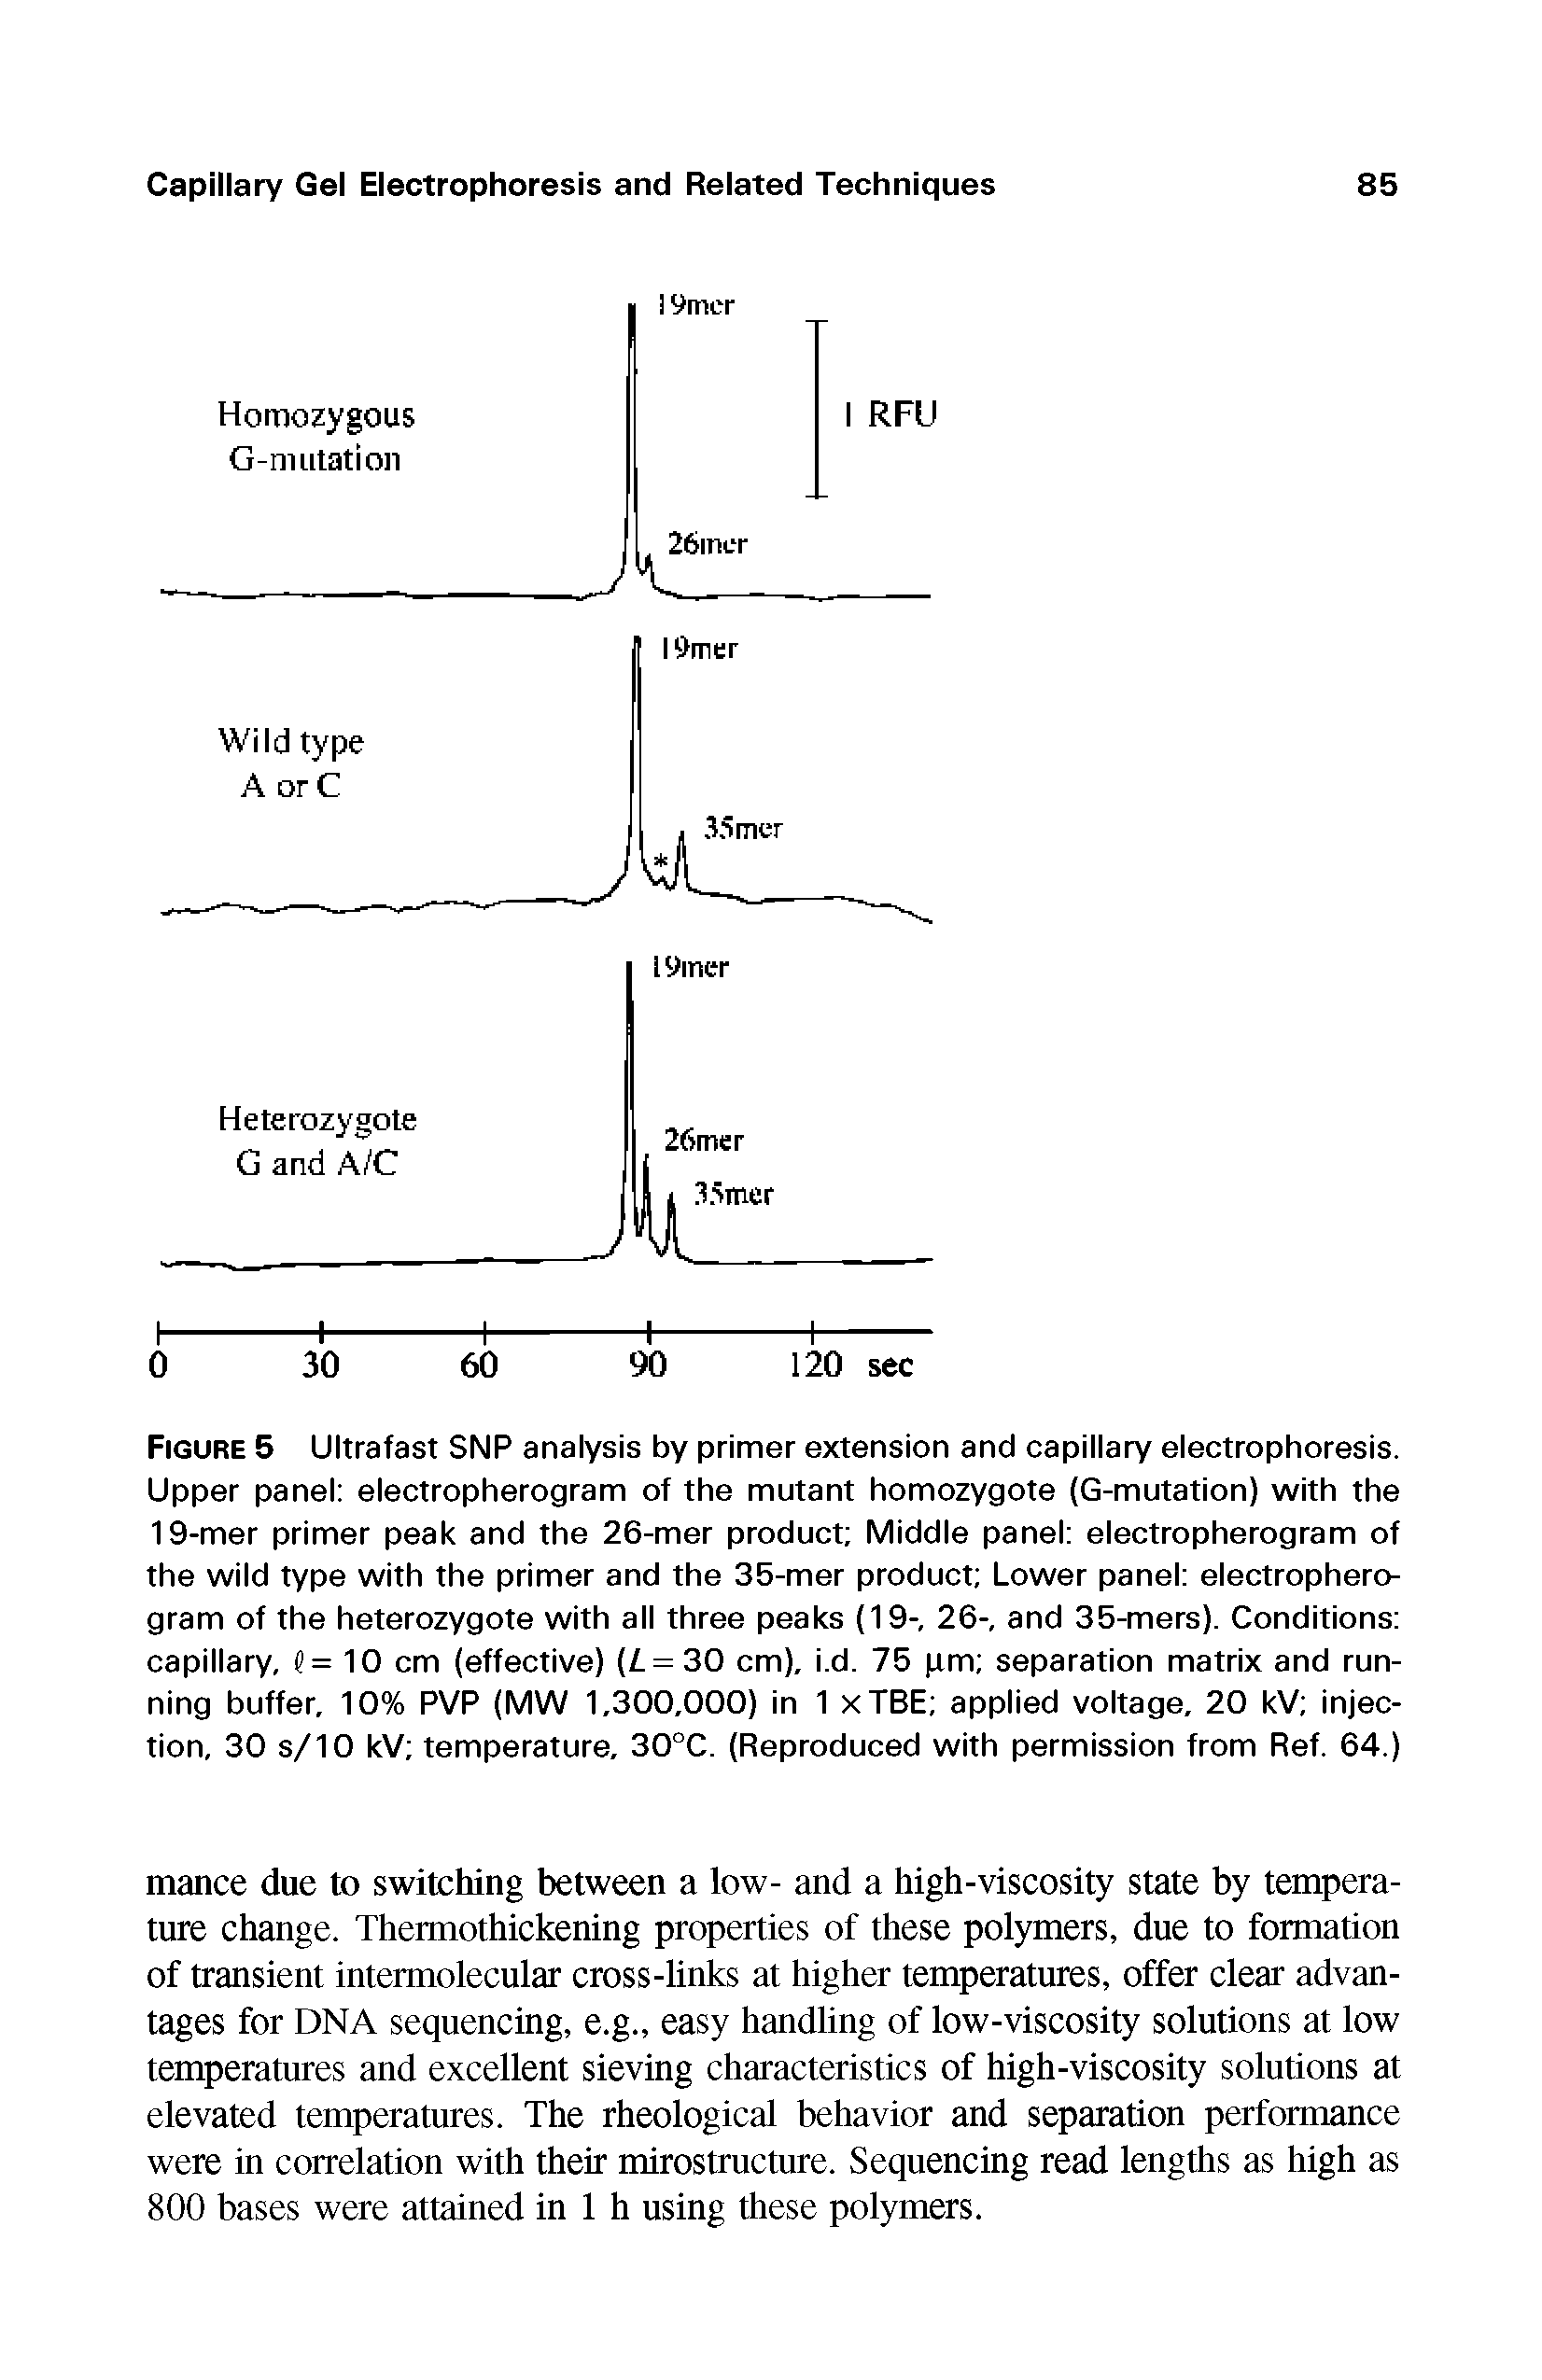 Figure 5 Ultrafast SNP analysis by primer extension and capillary electrophoresis. Upper panel electropherogram of the mutant homozygote (G-mutation) with the 19-mer primer peak and the 26-mer product Middle panel electropherogram of the wild type with the primer and the 35-mer product Lower panel electropherogram of the heterozygote with all three peaks (19-, 26-, and 35-mers). Conditions capillary, = 10 cm (effective) (L = 30 cm), i.d. 75 pm separation matrix and running buffer, 10% PVP (MW 1,300,000) in 1 xTBE applied voltage, 20 kV injection, 30 s/10 kV temperature, 30°C. (Reproduced with permission from Ref. 64.)...